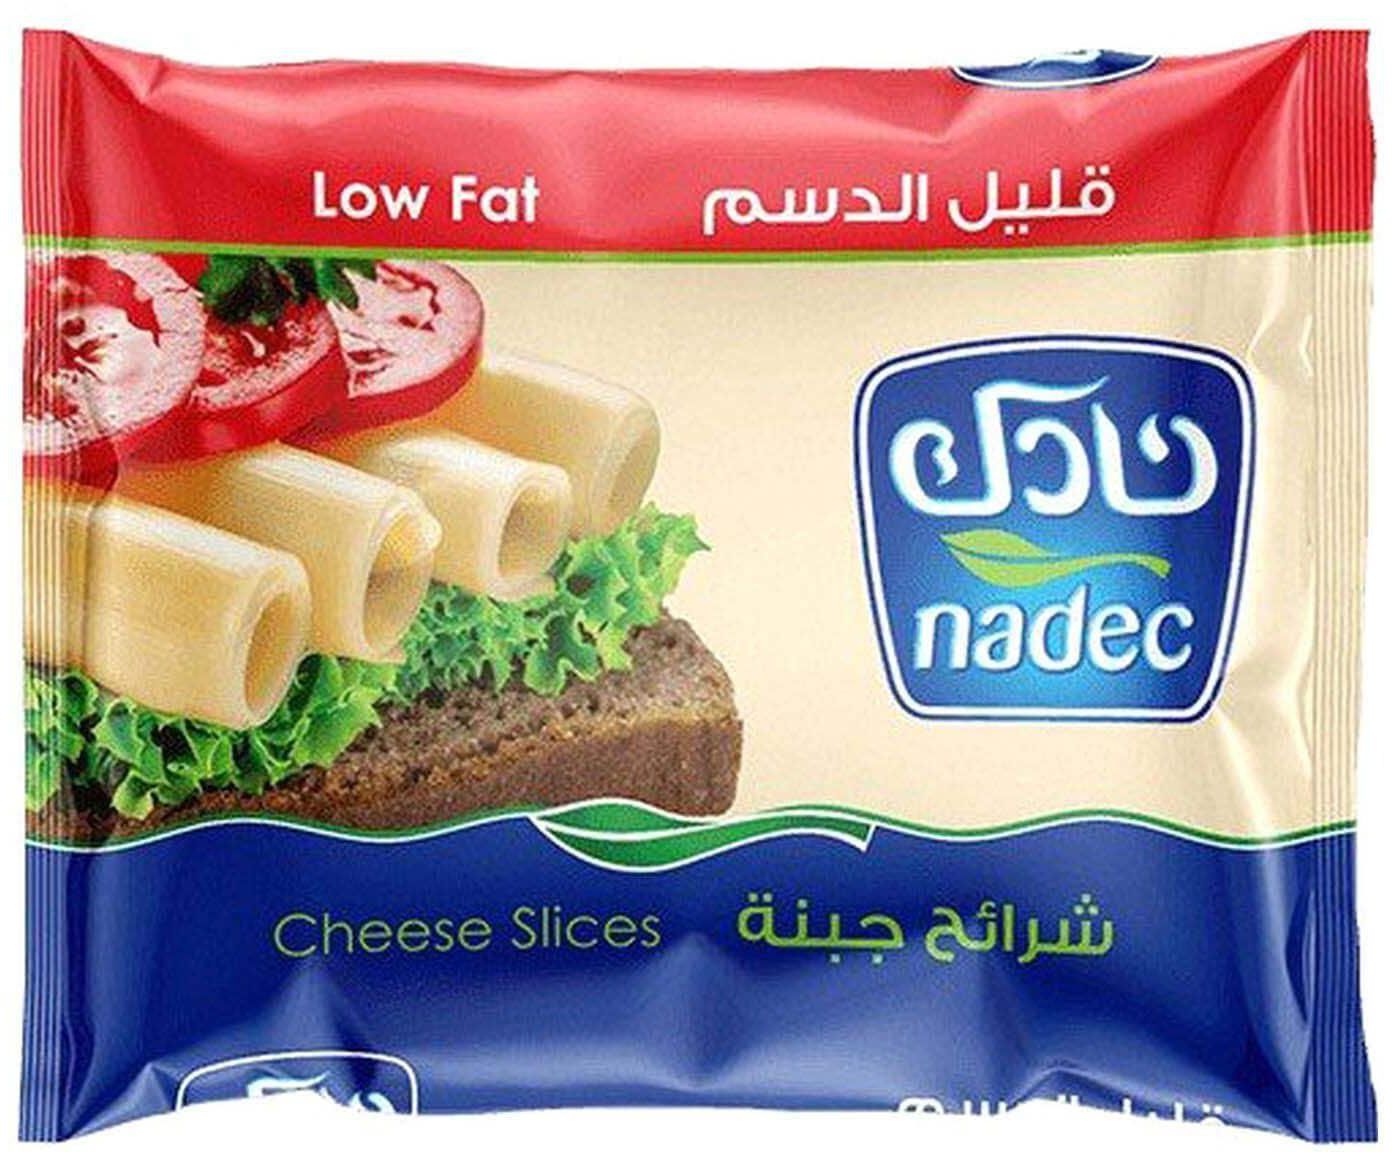 Nadec Cheese Sliced Low Fat 200g